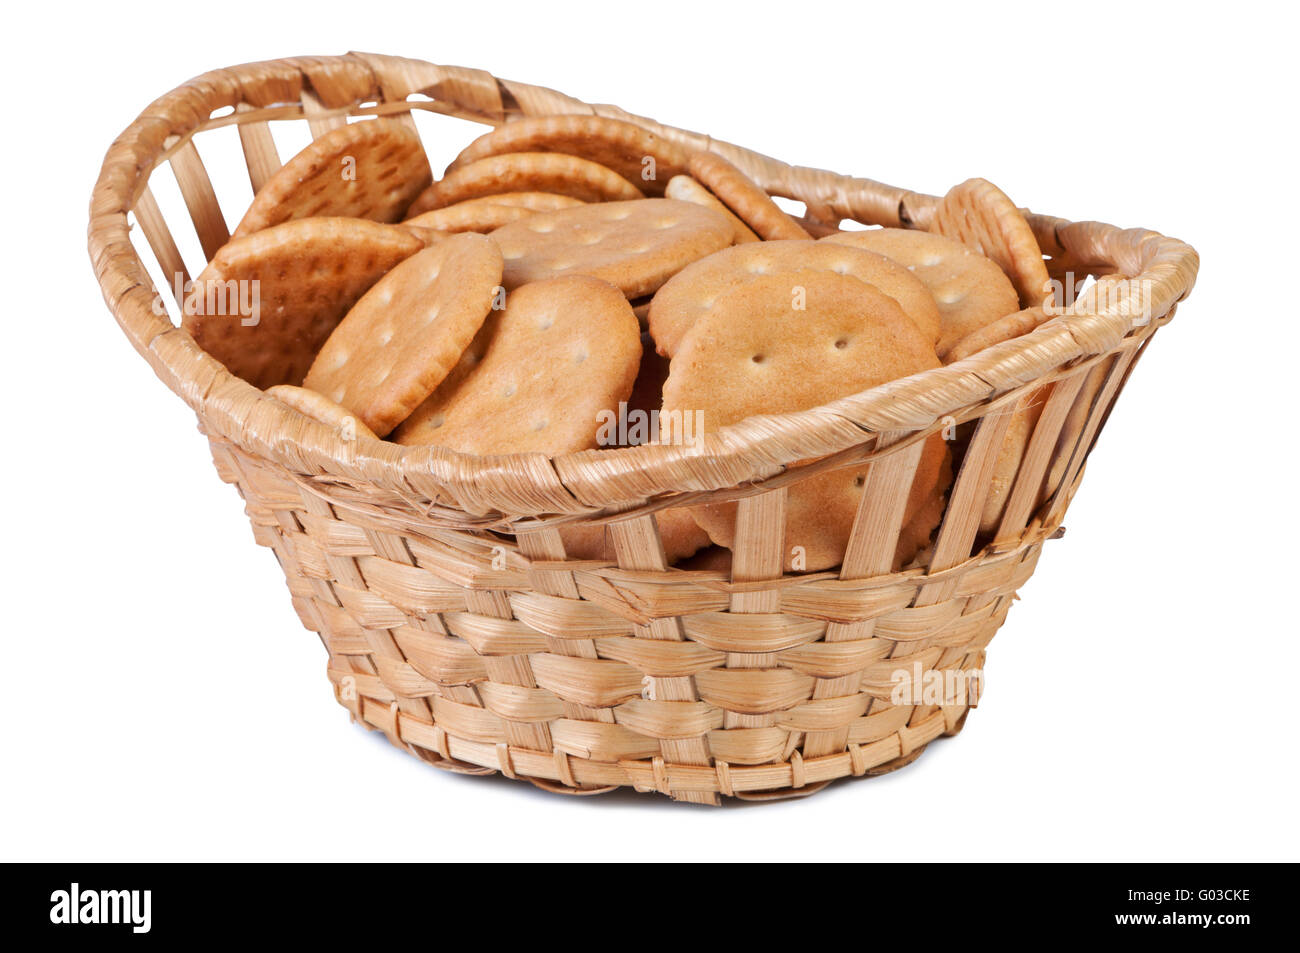 Cookies in a basket isolate on white background. Stock Photo